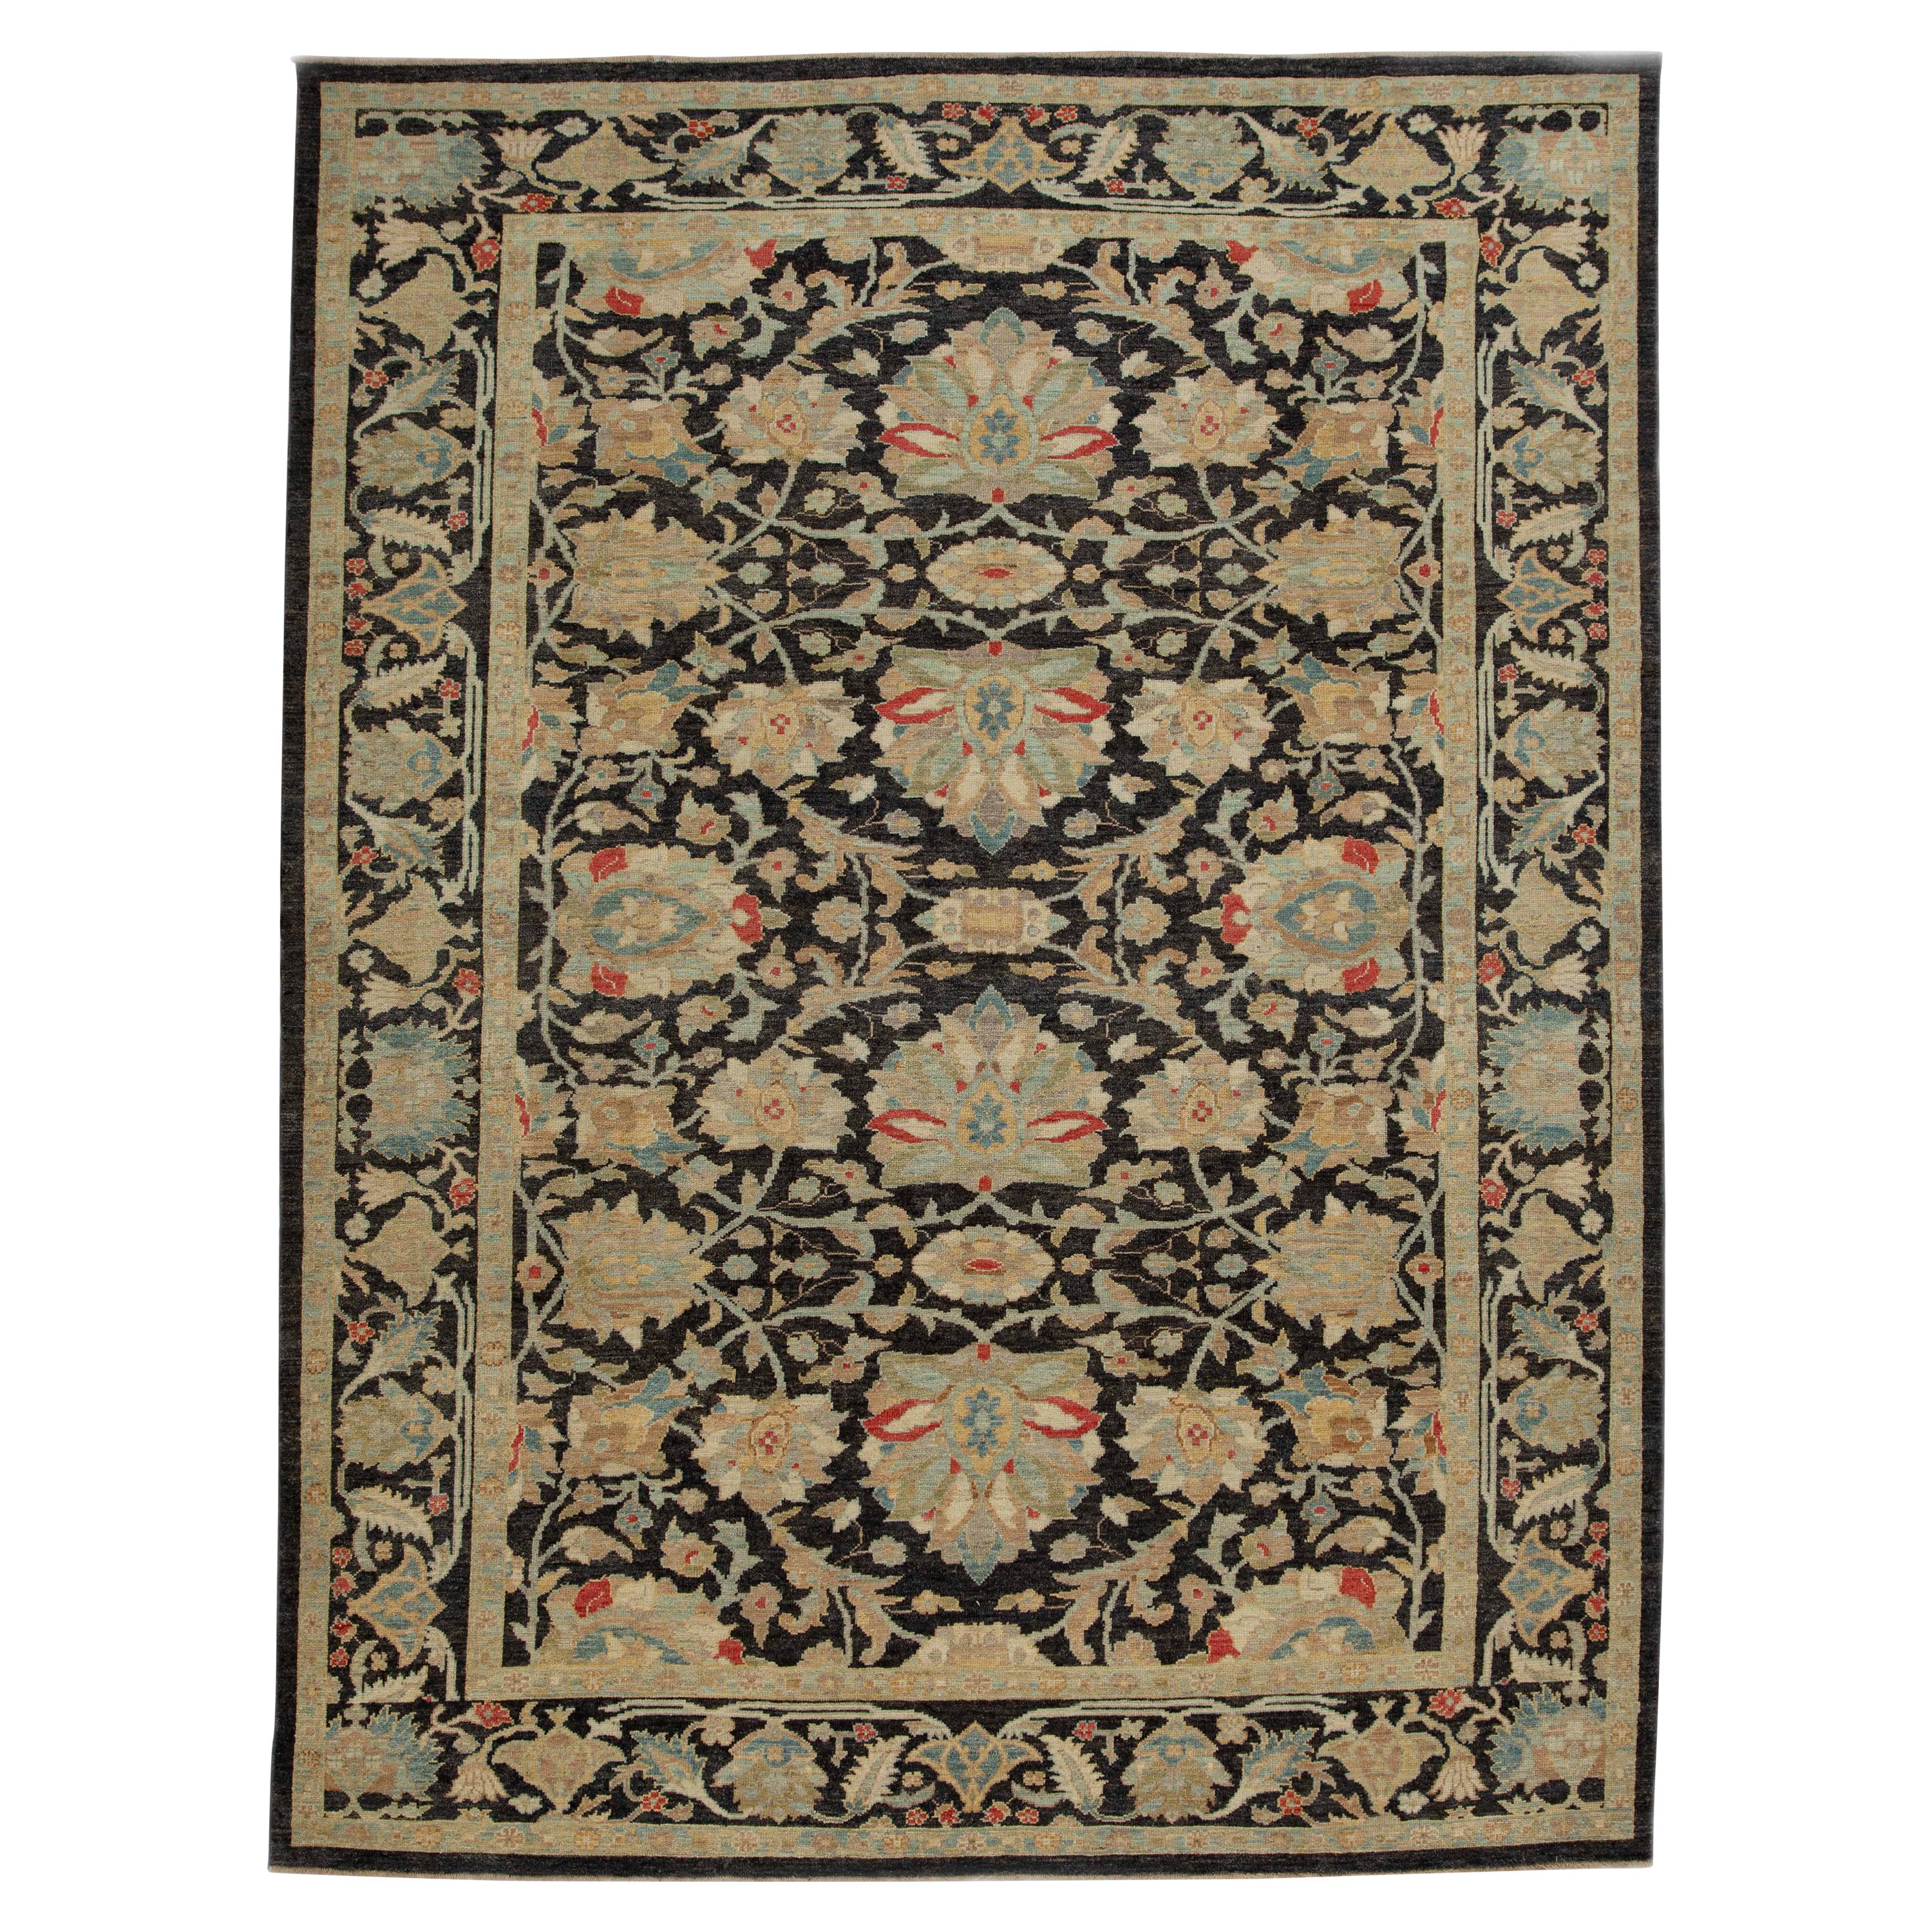 Modern Sultanabad Turkish Rug with Black Field and Floral Details in Red and Blu